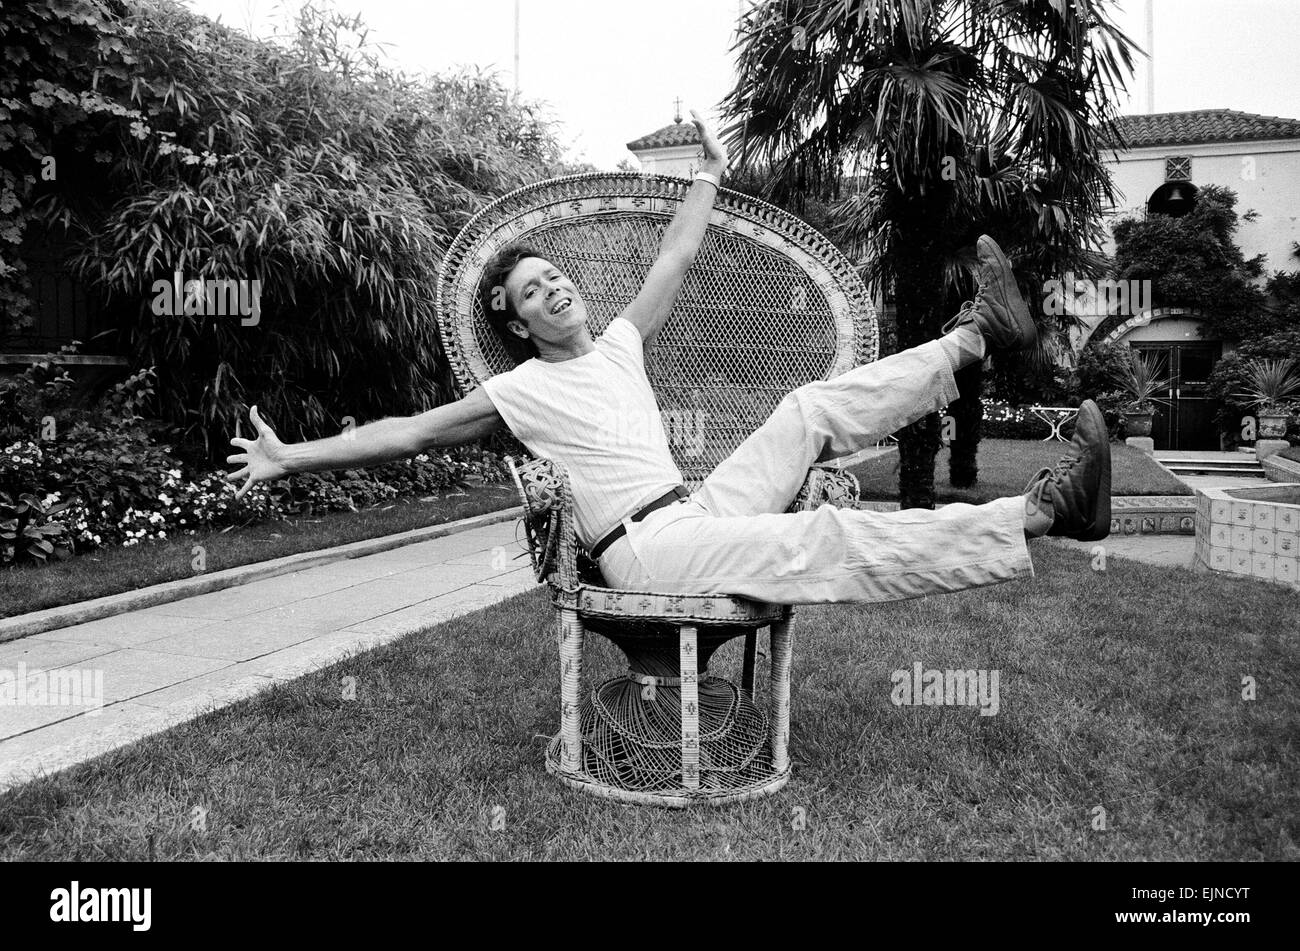 Cliff Richard celebrates 25 years in the music business. 29th September 1983 *** Local Caption *** watscan - - 19/05/2010 Stock Photo